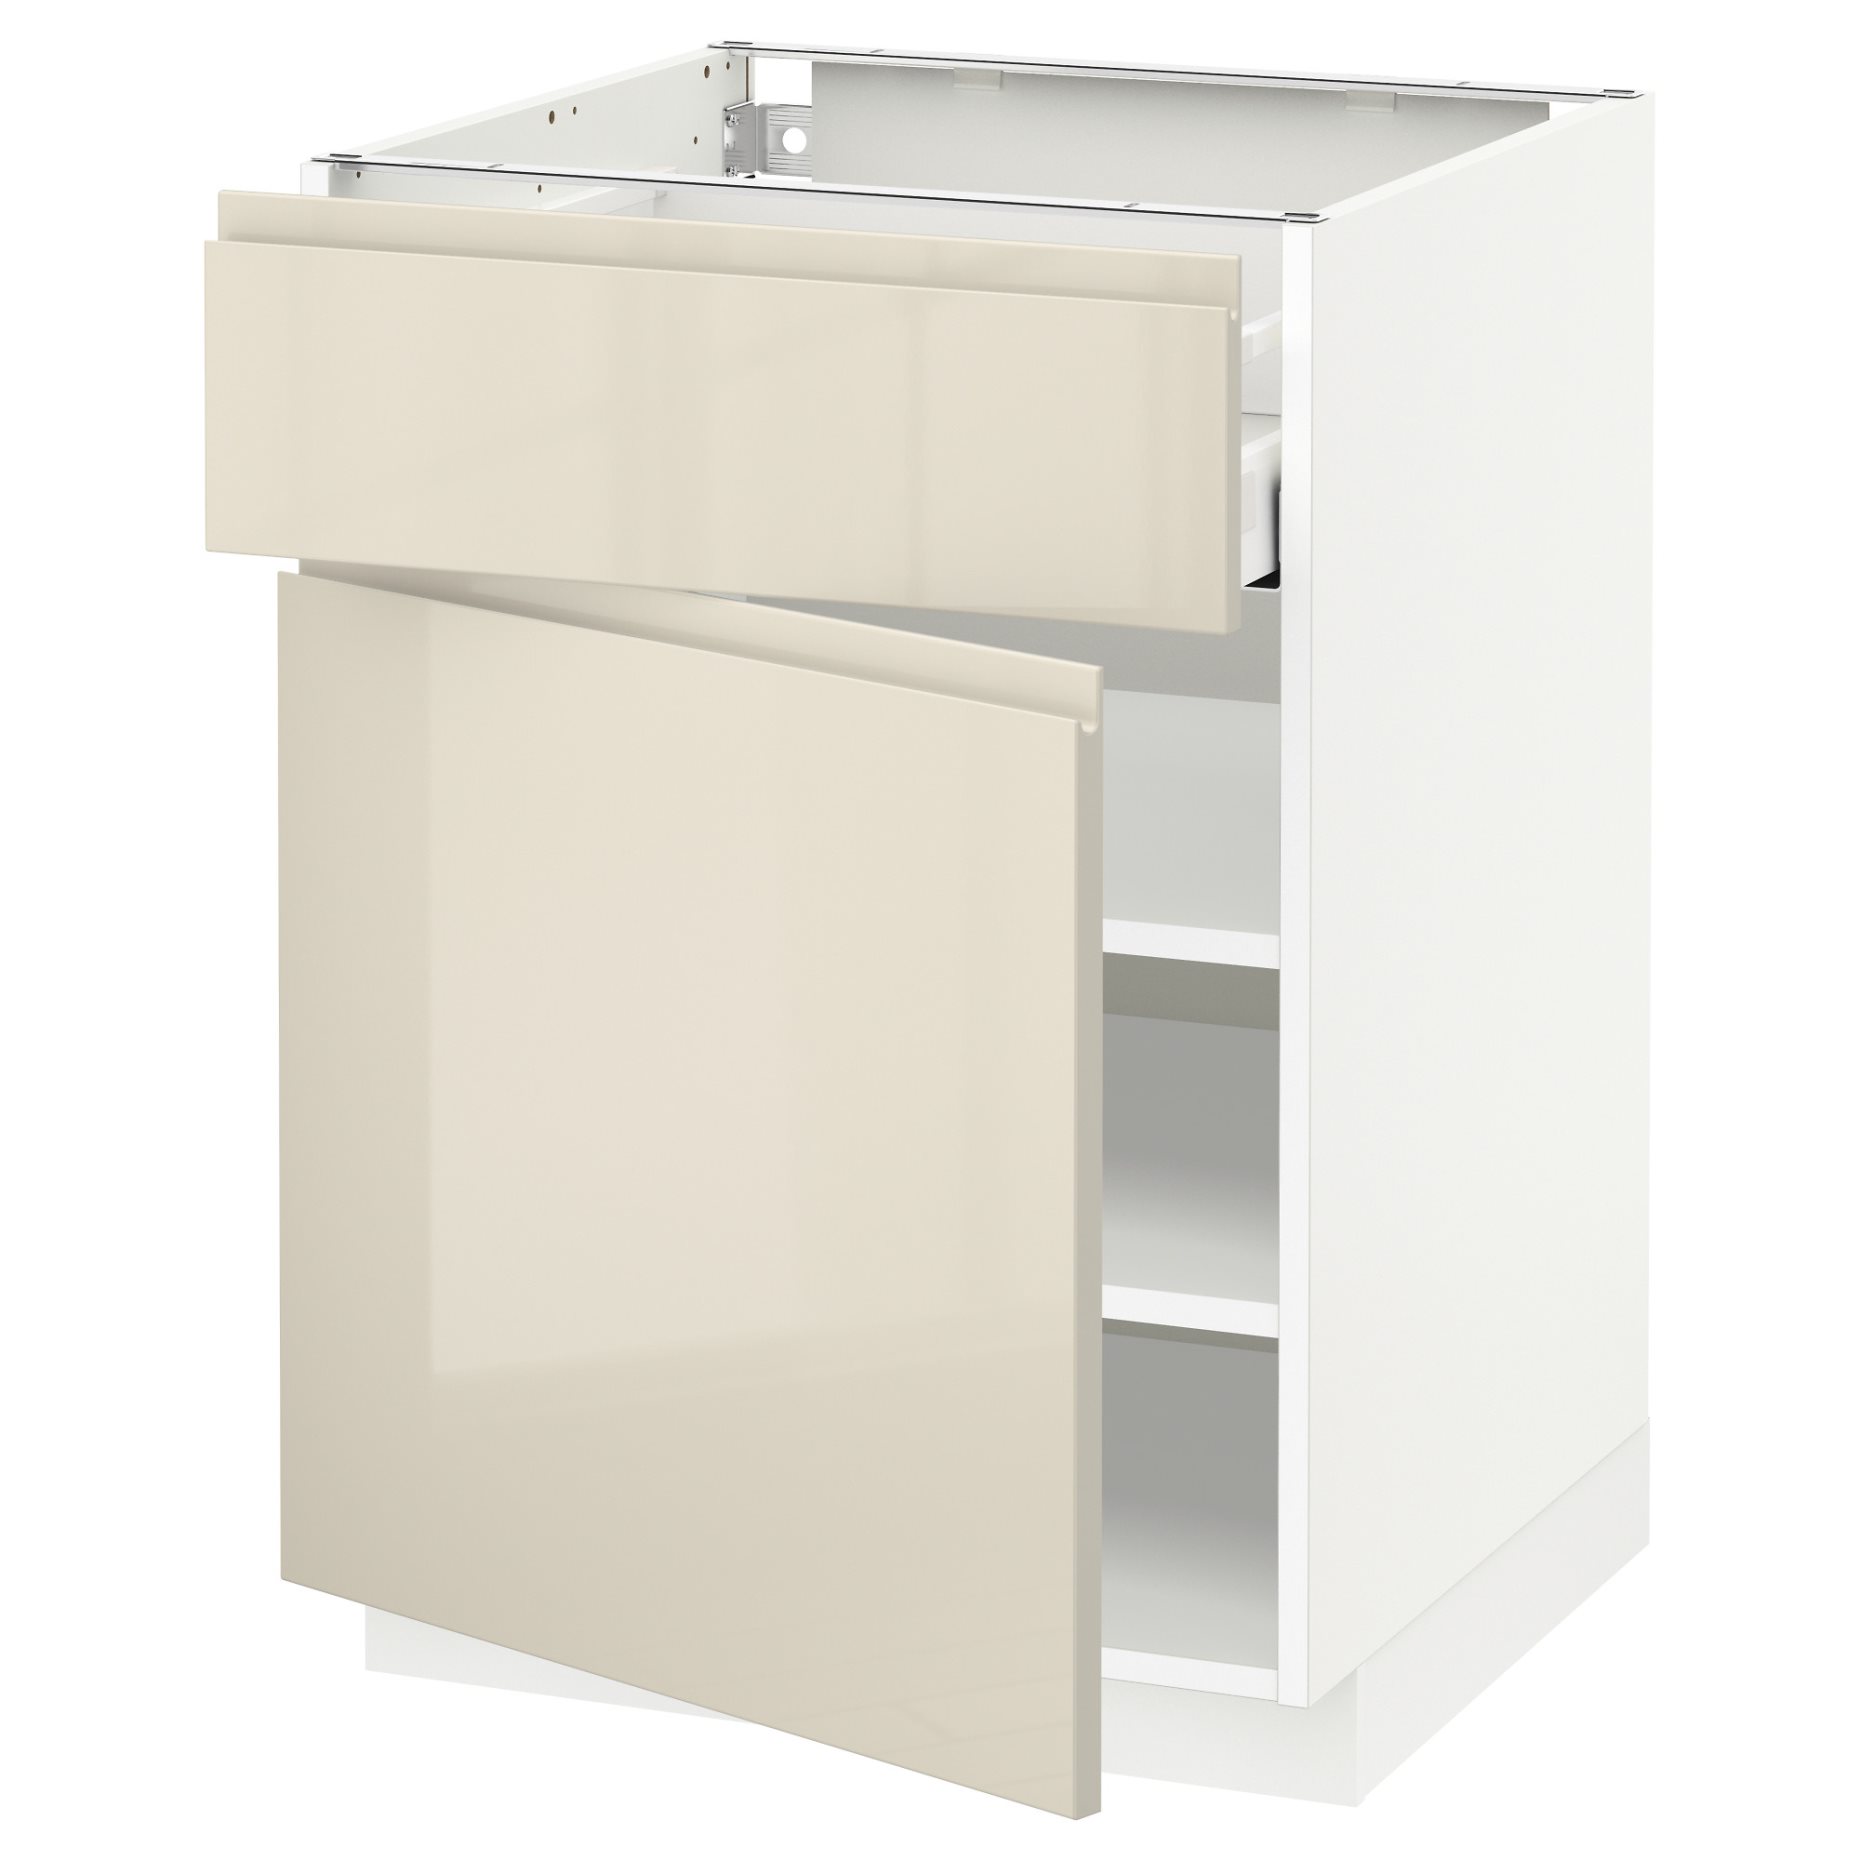 METOD/MAXIMERA, base cabinet with drawer/door, 60x60 cm, 794.616.06